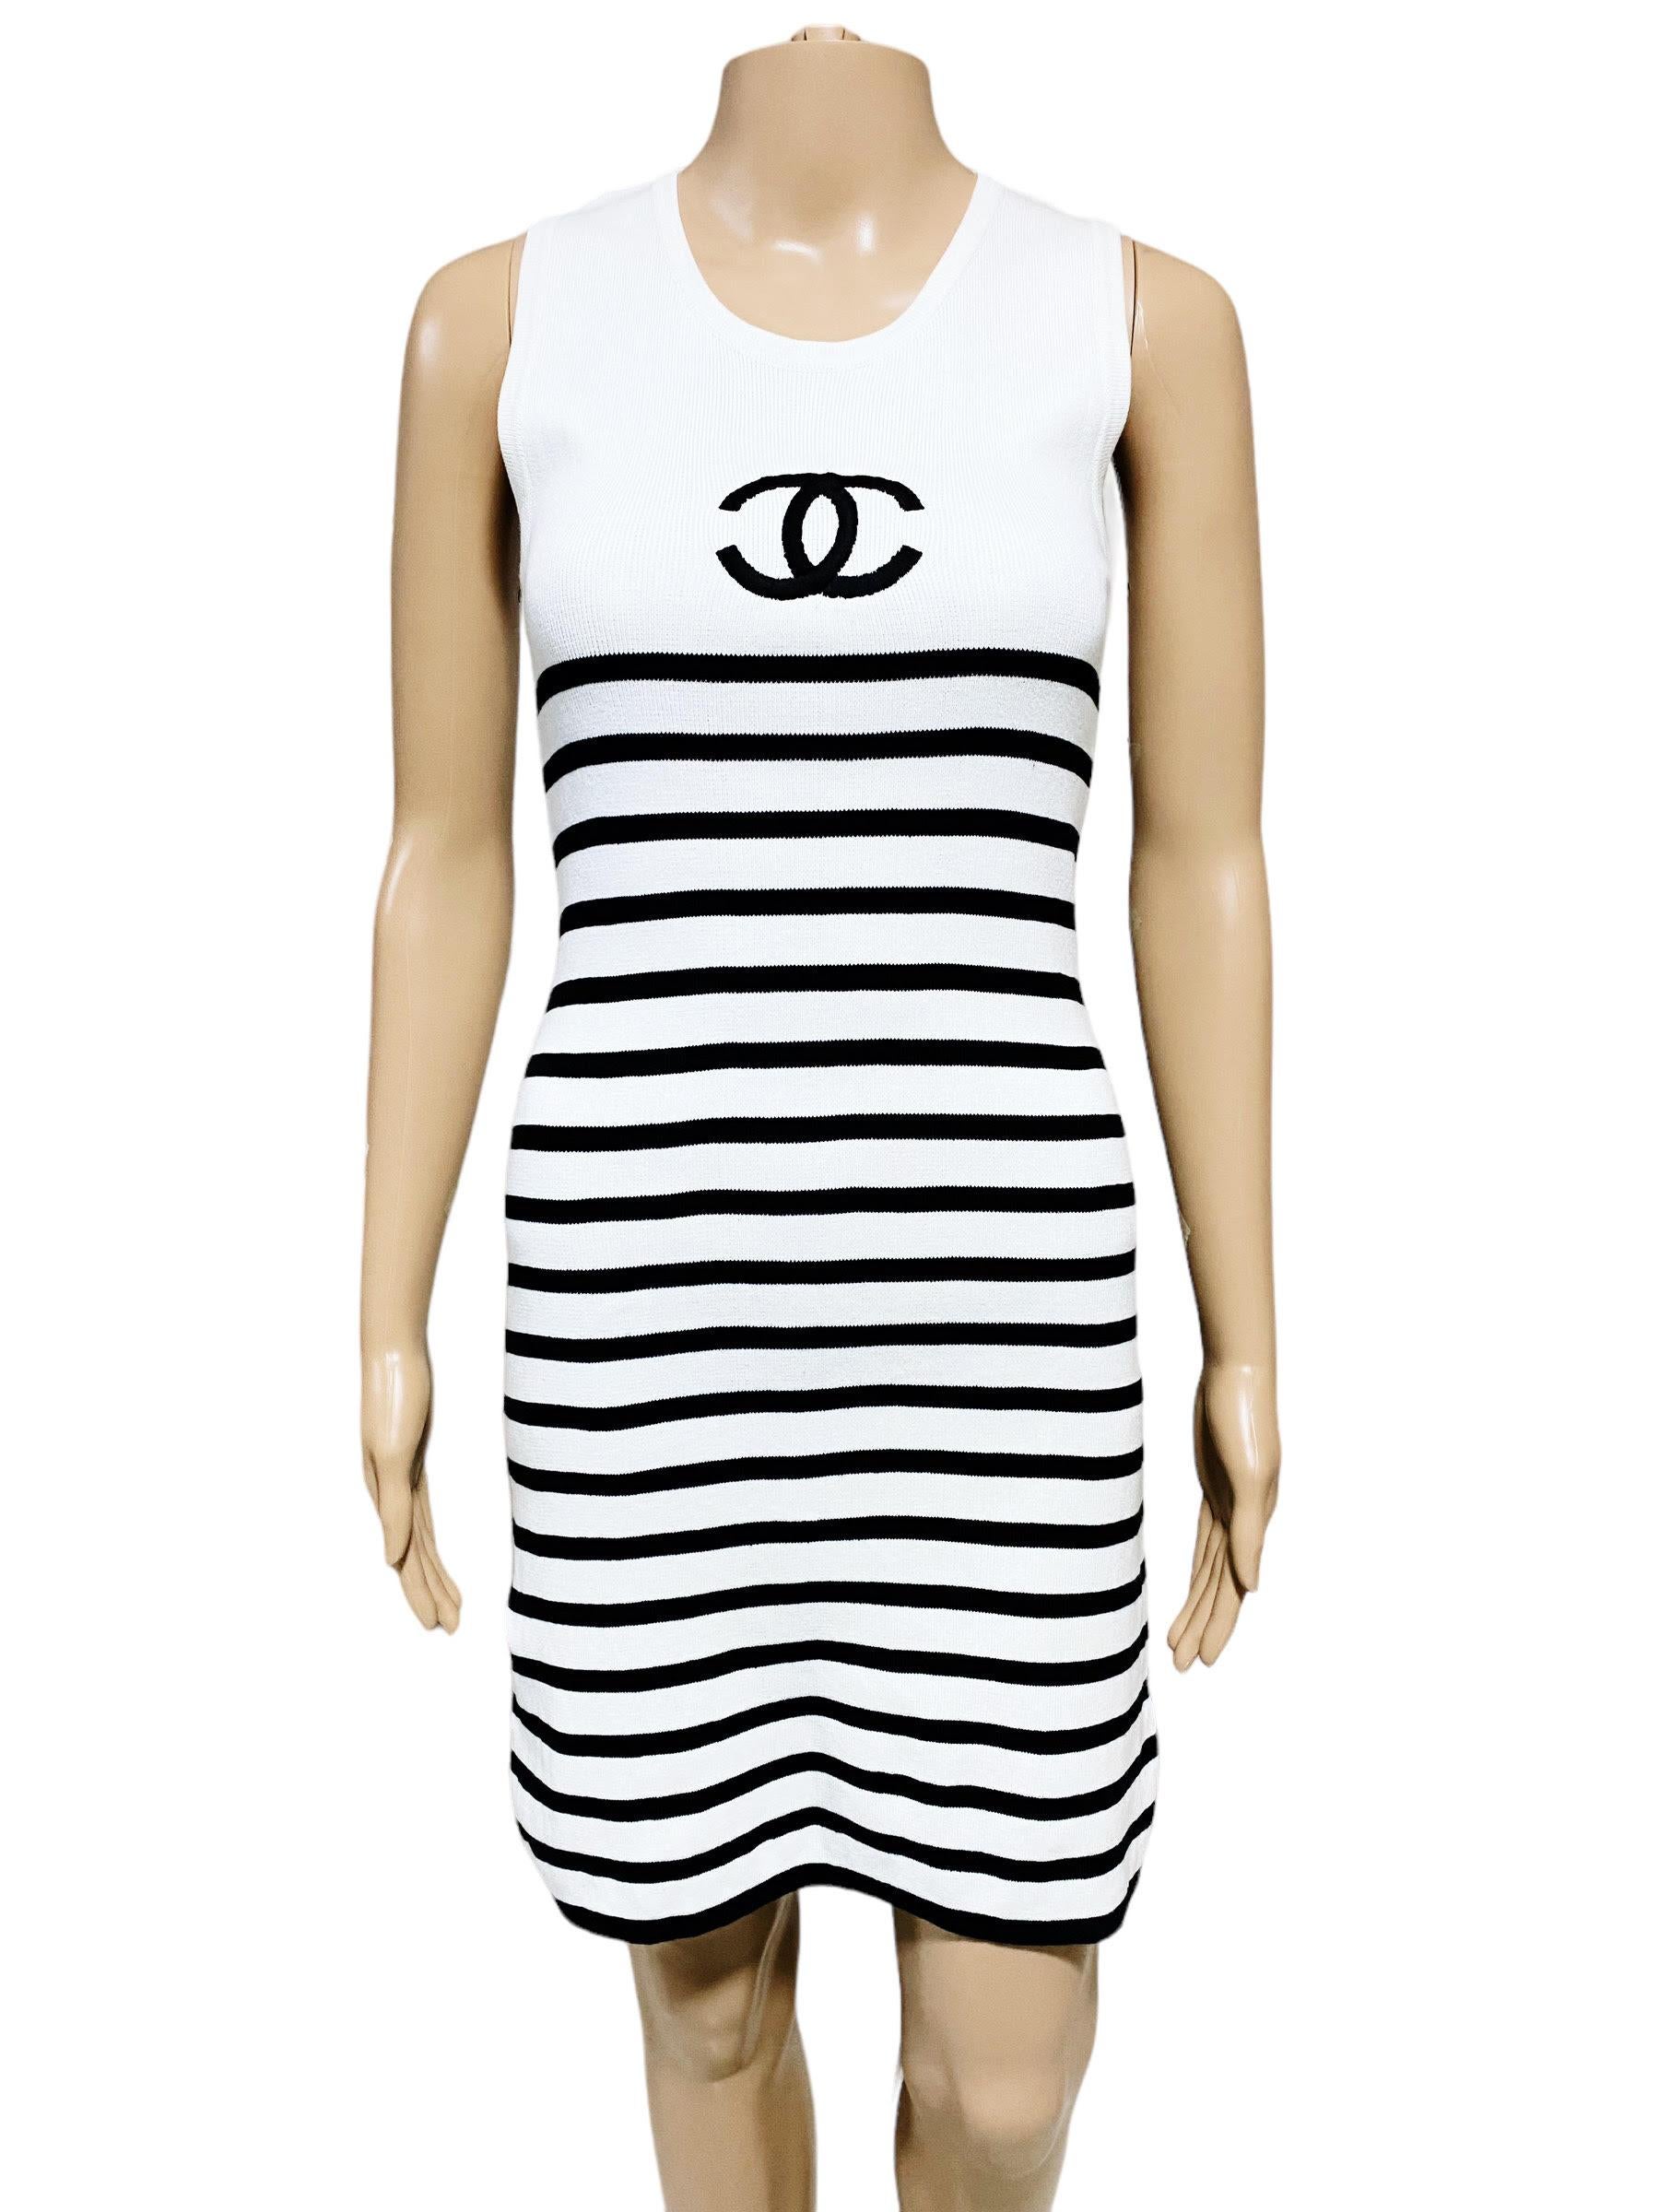 Vintage Chanel 1994 - CC knitted Striped Runway Dress In Excellent Condition For Sale In Iba, PH